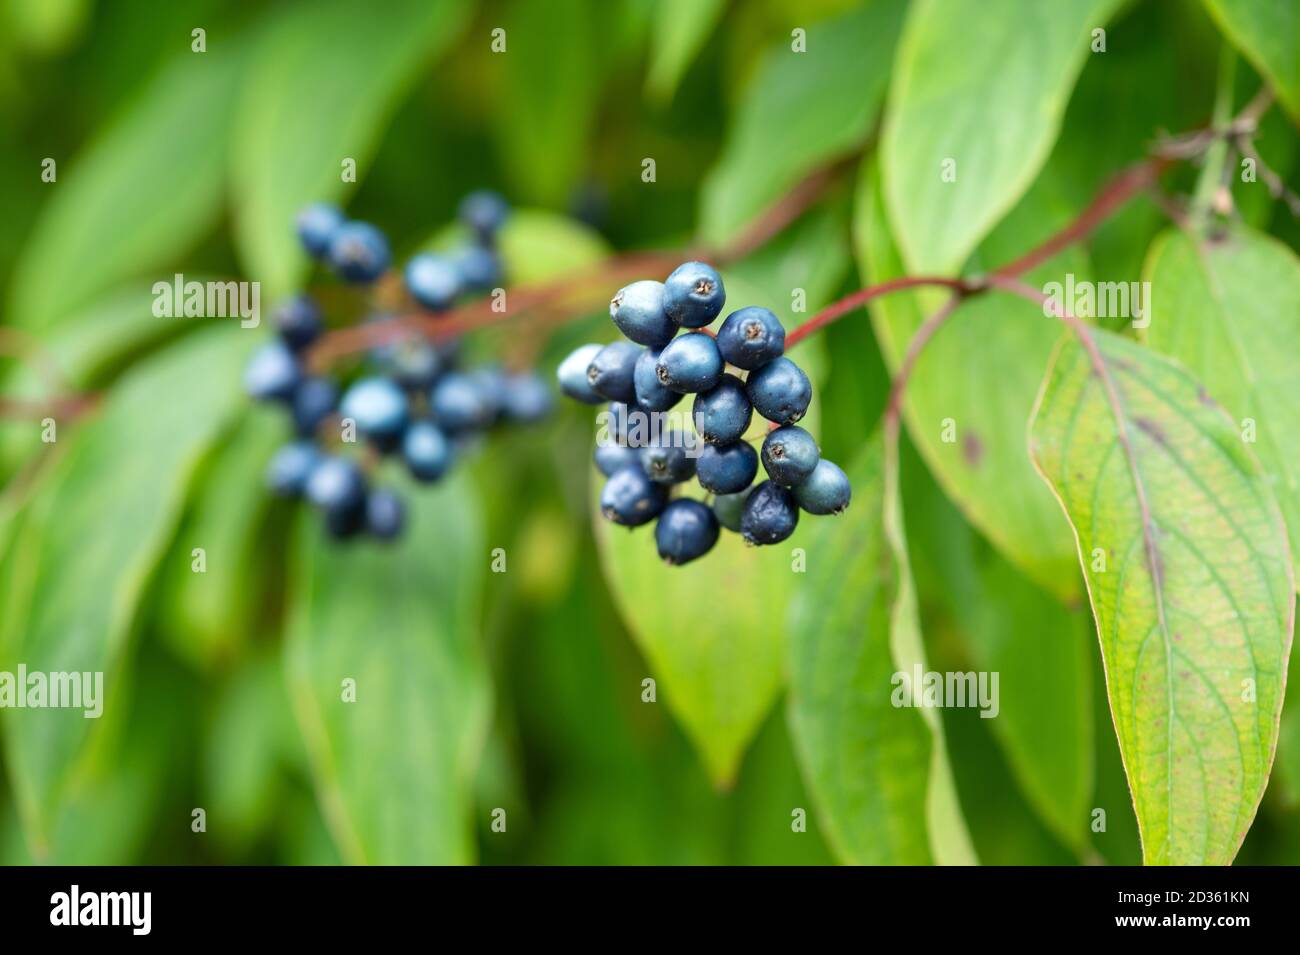 Branch of shrub with blue berries amongst green foliage. Stock Photo